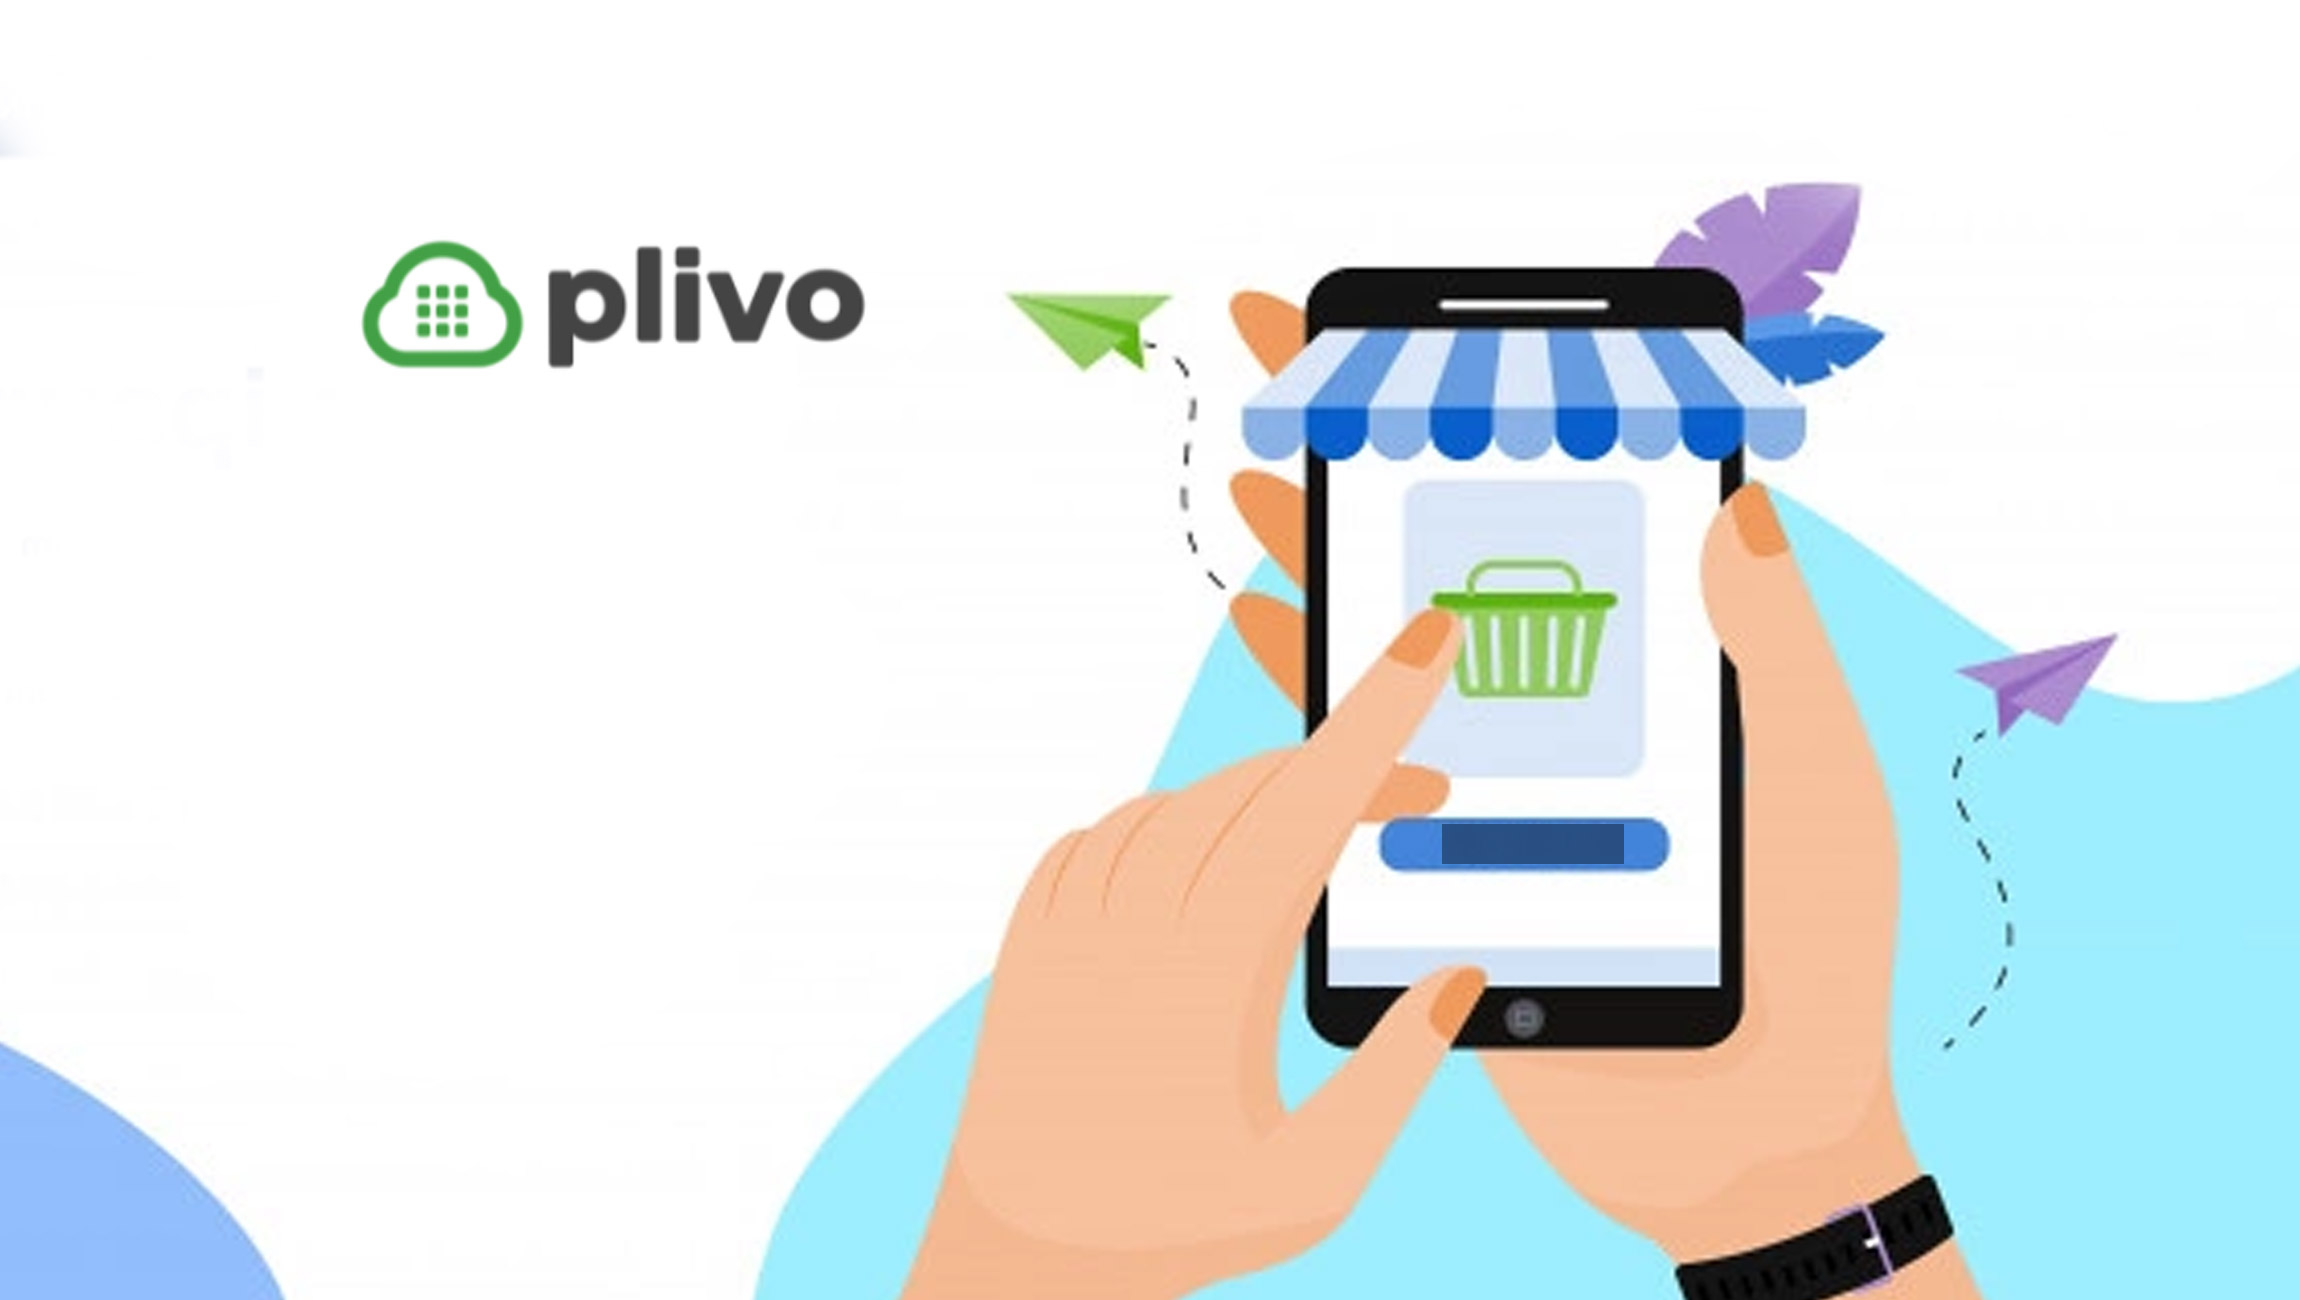 Plivo Survey Reveals Holiday Shoppers Want to Receive Communications from Retailers